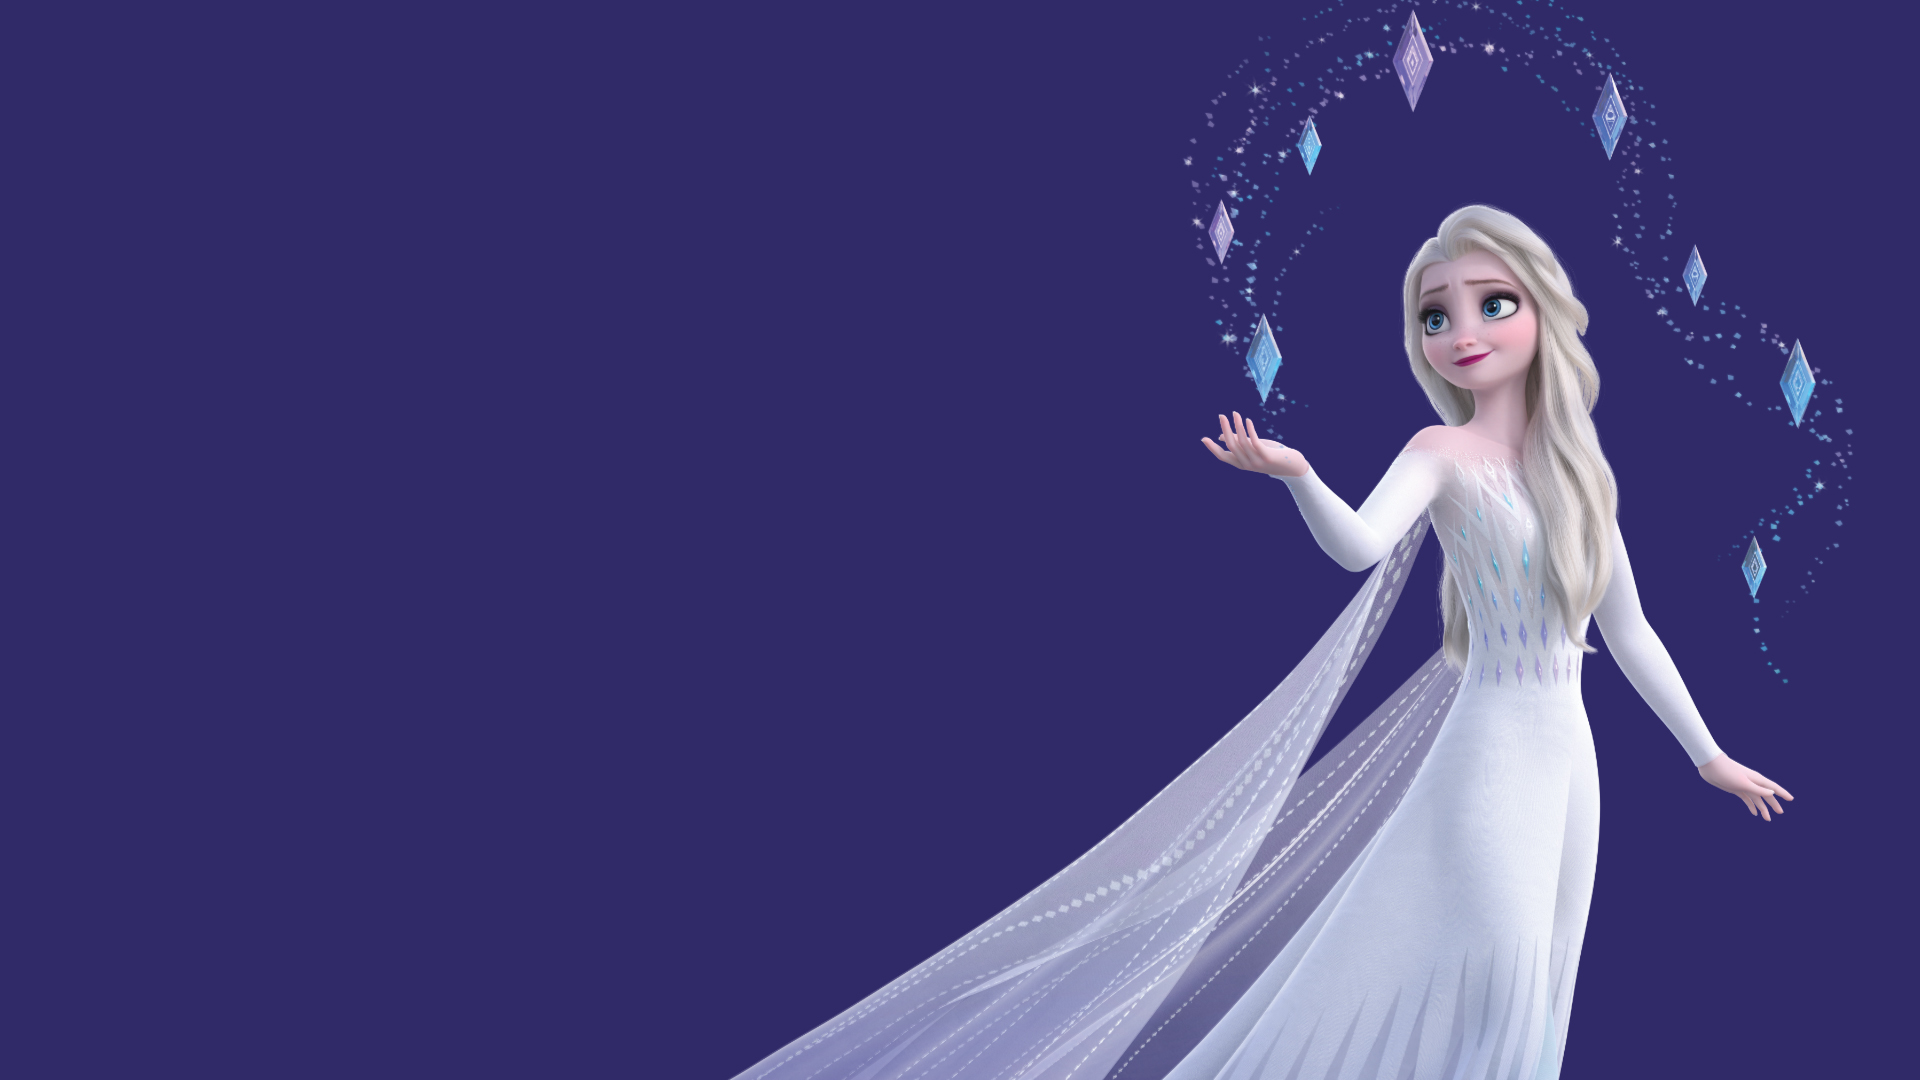 15 New Frozen 2 Hd Wallpapers With Elsa In White Dress And Her Hair Down -  Desktop And Mobile - Youloveit.Com